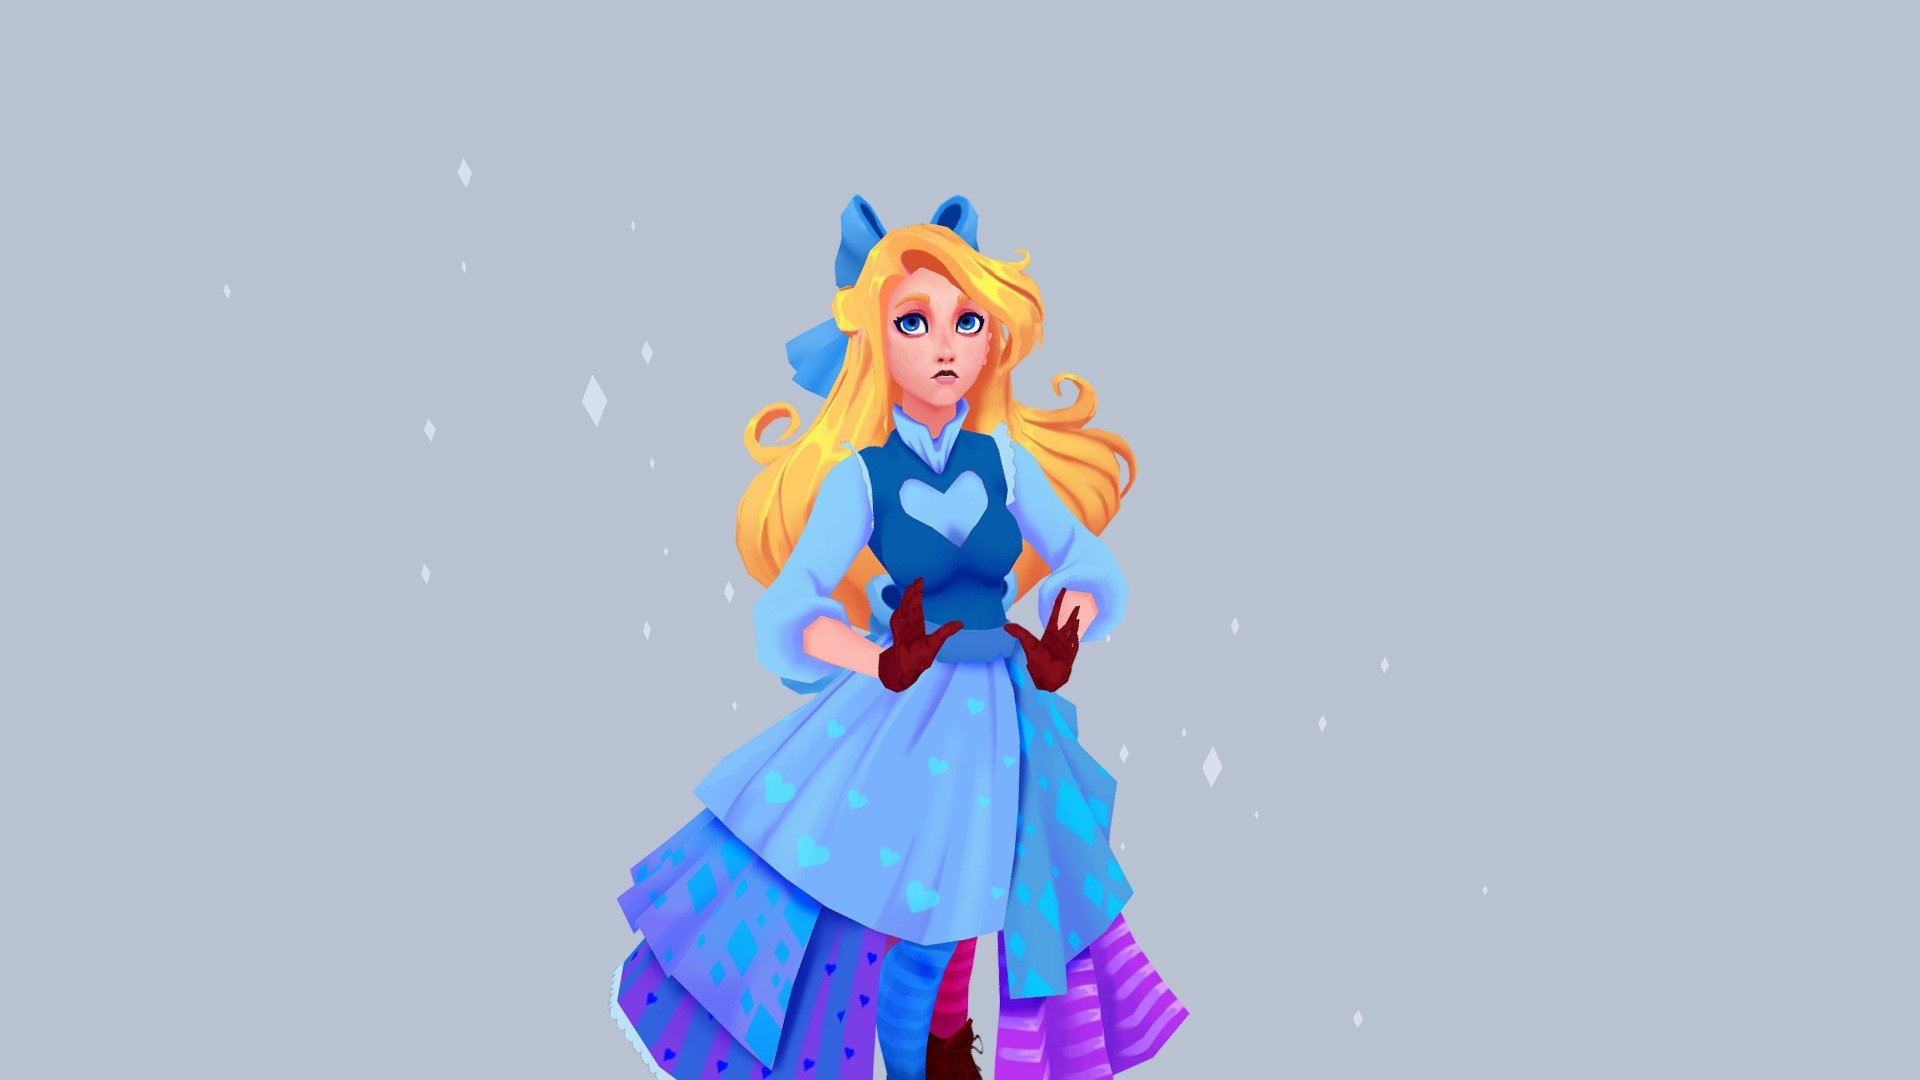 Created Alice for Polycount Bi-Monthly Character Art Challenge | April - May 2019.  Based on concept by Patrycja Wójcik.

Started from initial sculpt in zbrush and created lowpoly model in Blender 2.8-Beta.  Handpainted with a single layer in blender with some edits afterwards in gimp.

More images and information available on my artstation page: https://www.artstation.com/donengland - Alice - Polycount Character Challenge - 3D model by donenglandart 3d model